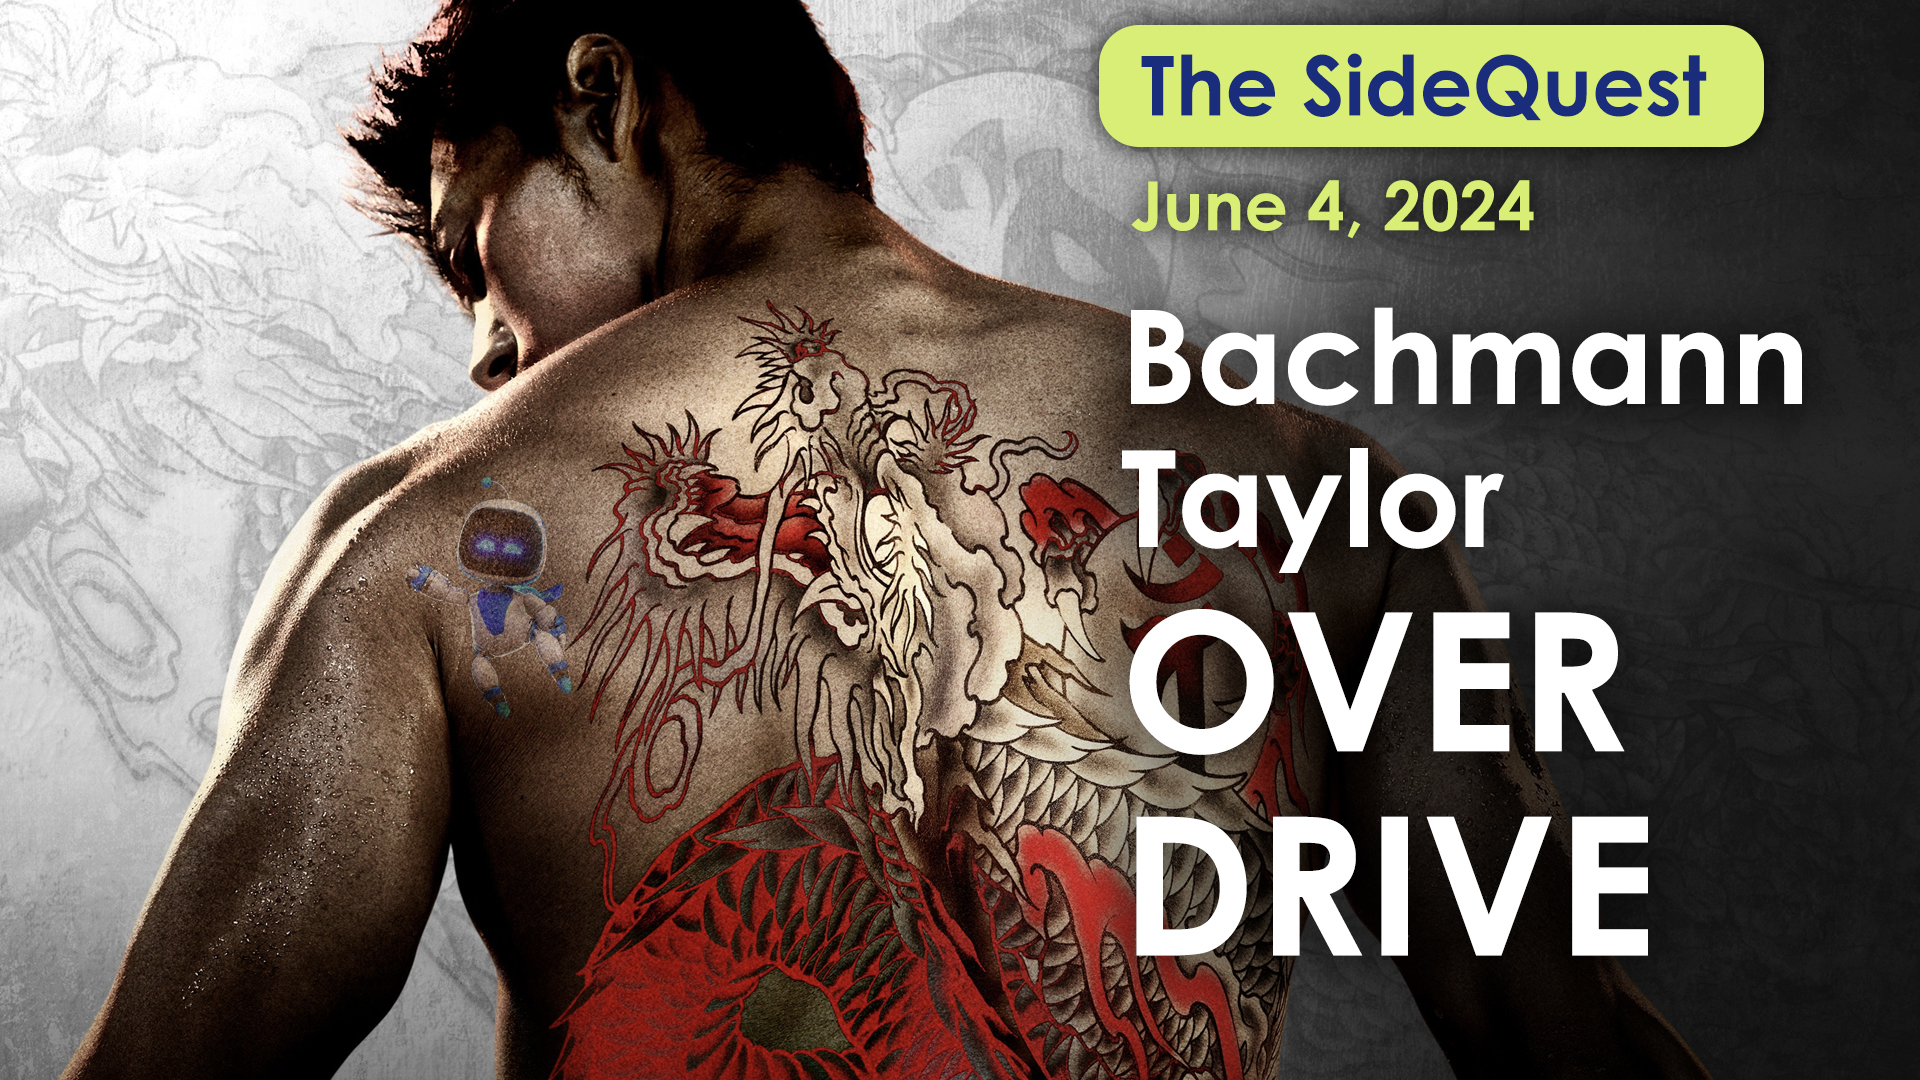 The SideQuest LIVE! June 4, 2024: Bachmann-Taylor Overdrive